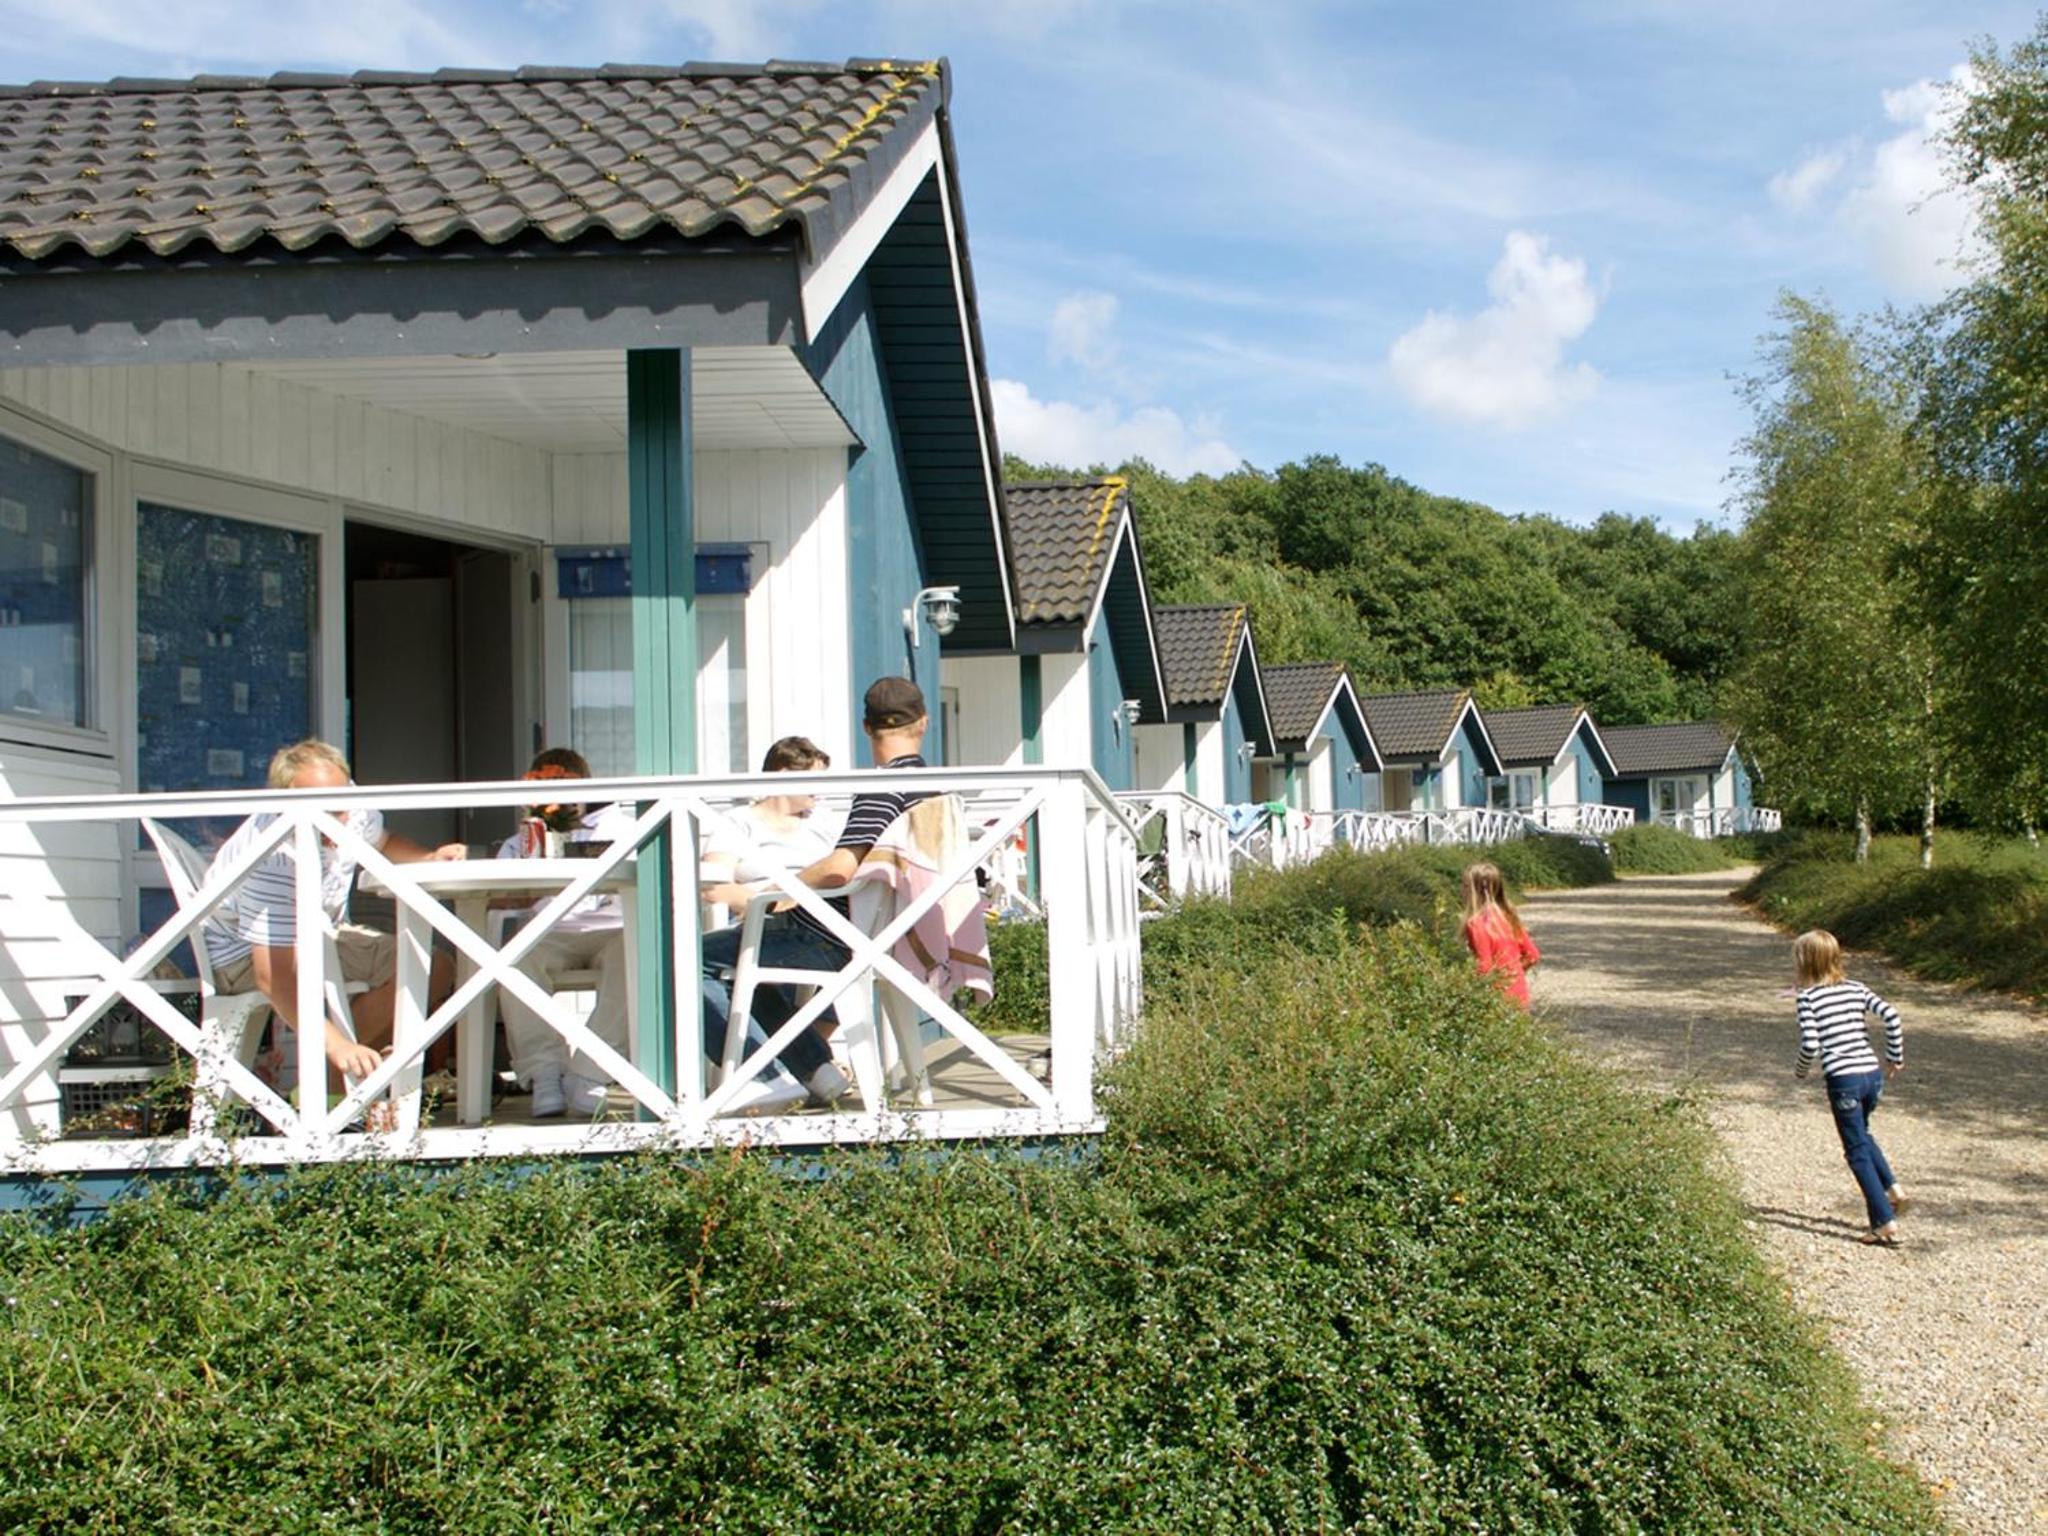 TopCamp Riis Cottages